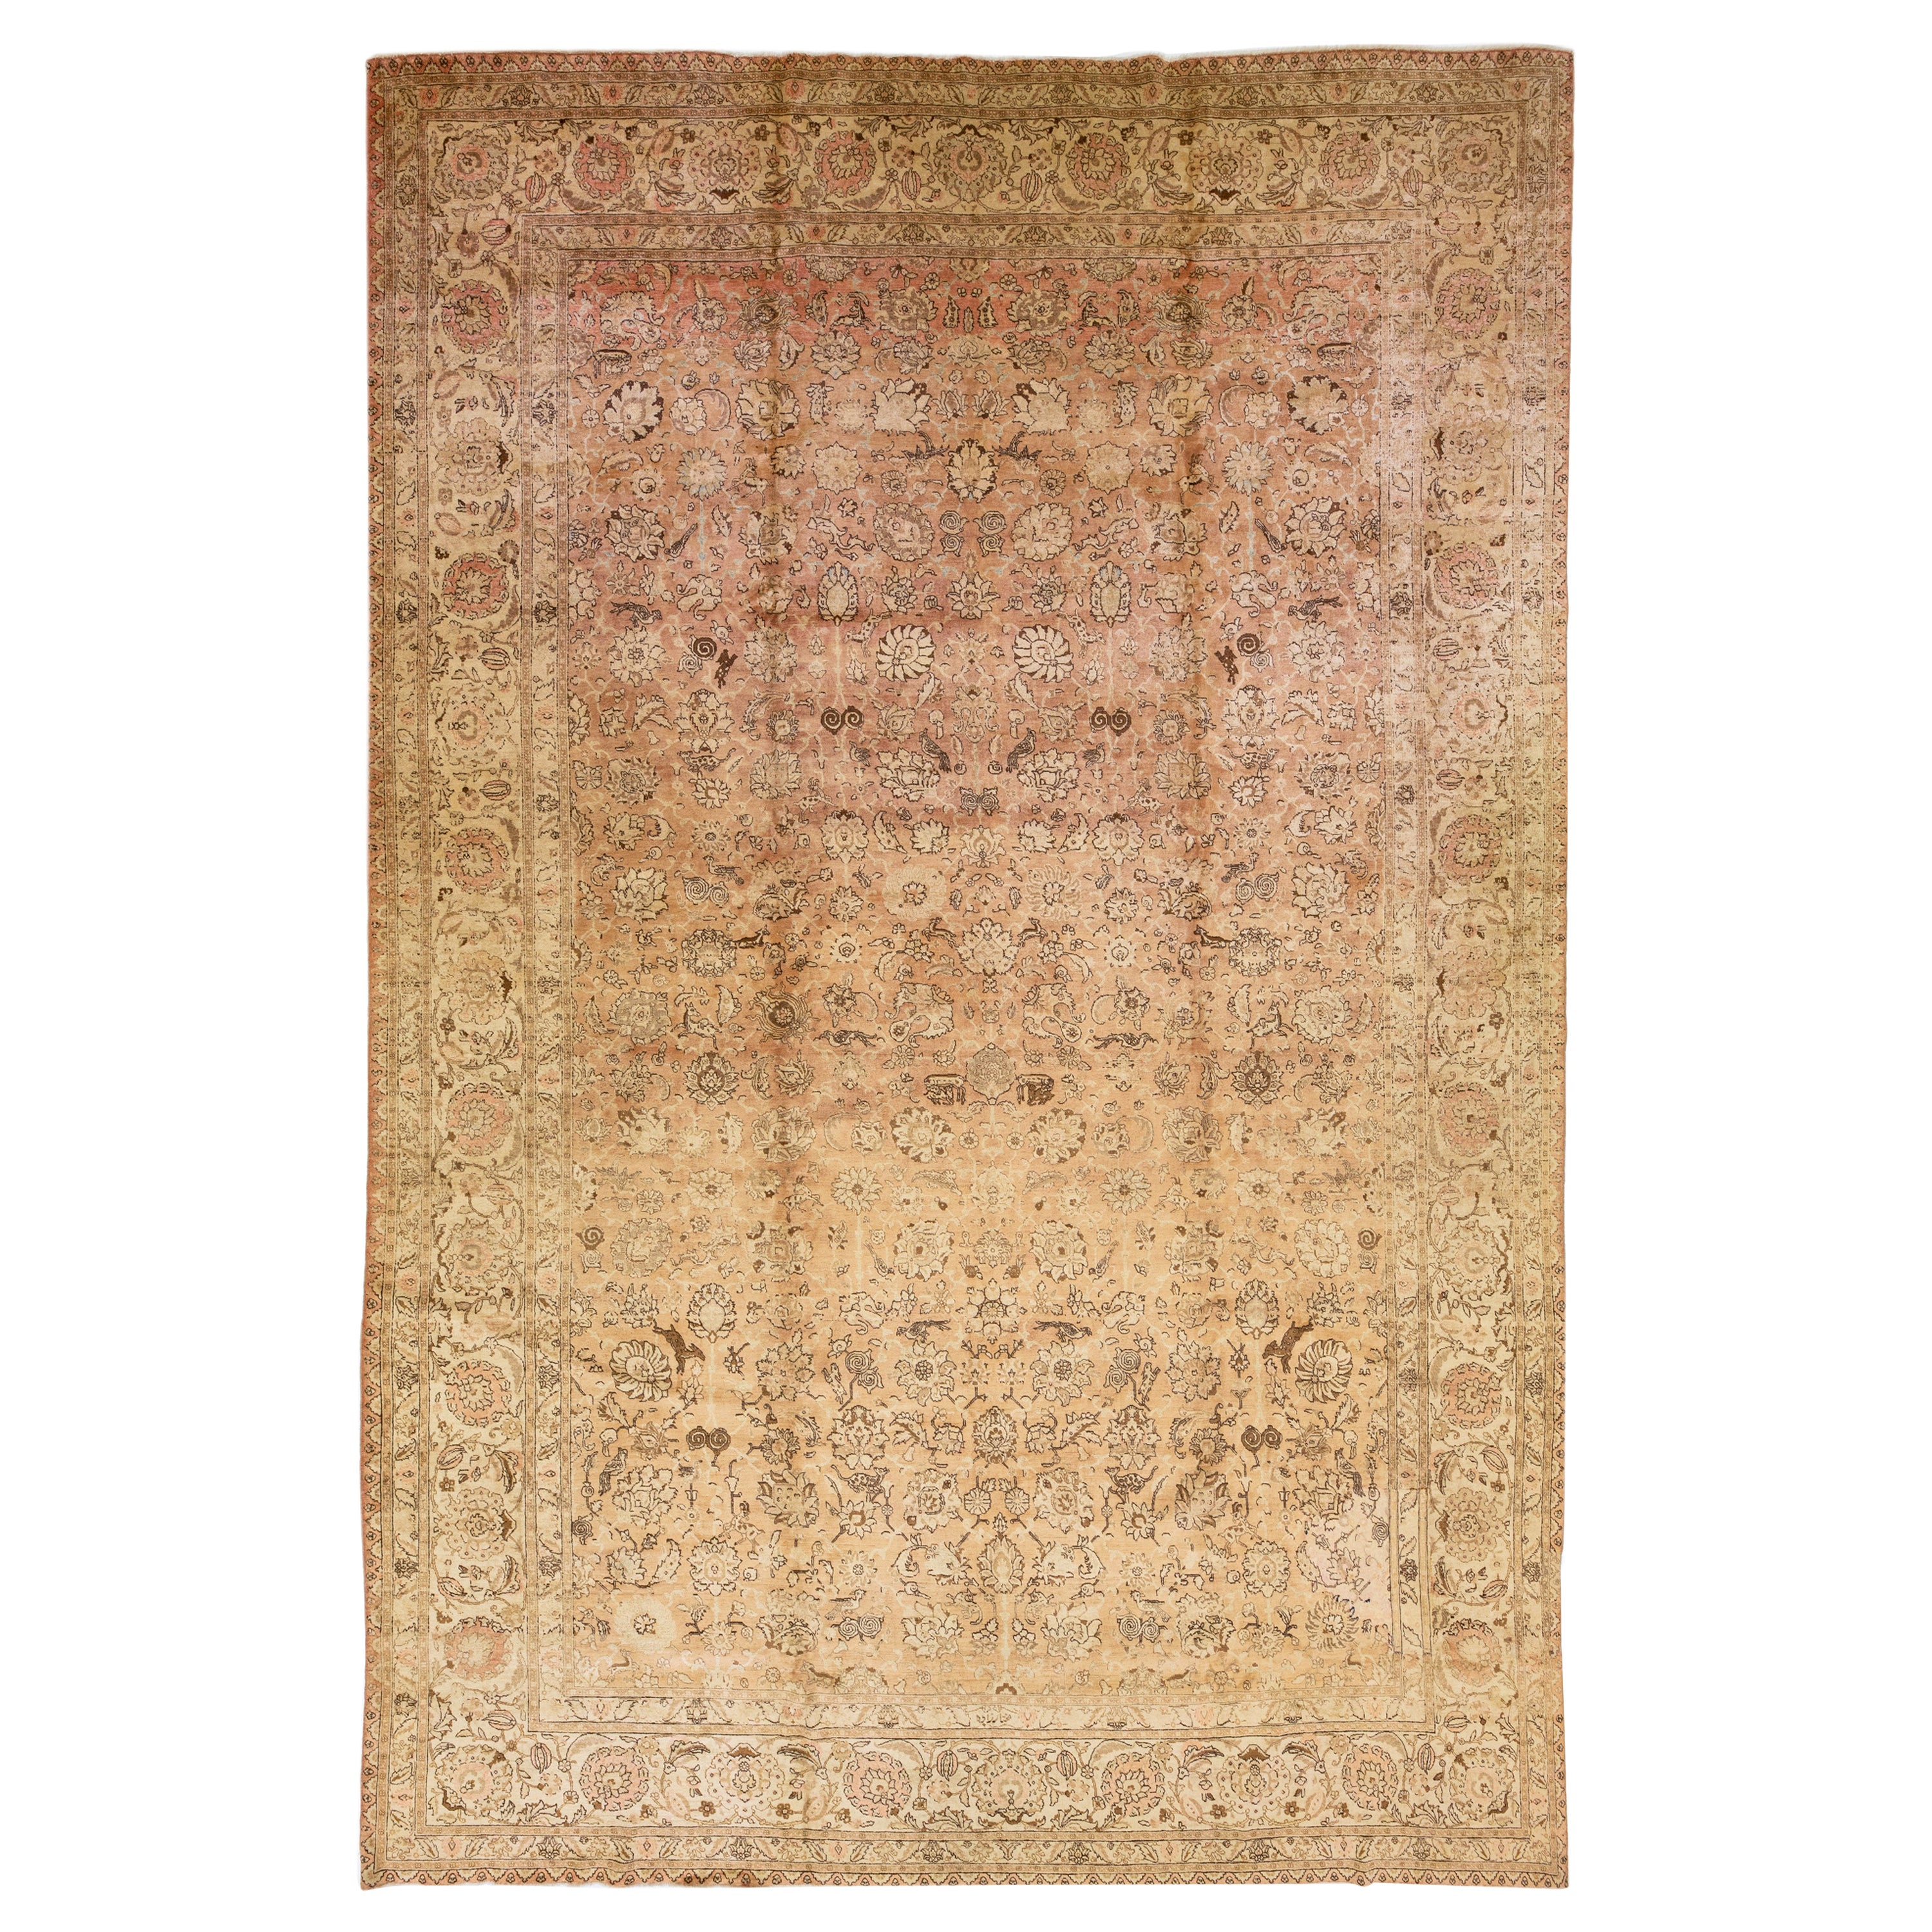 Oversize Allover Antique Persian Tabriz Wool Rug Handmade in Peach For Sale